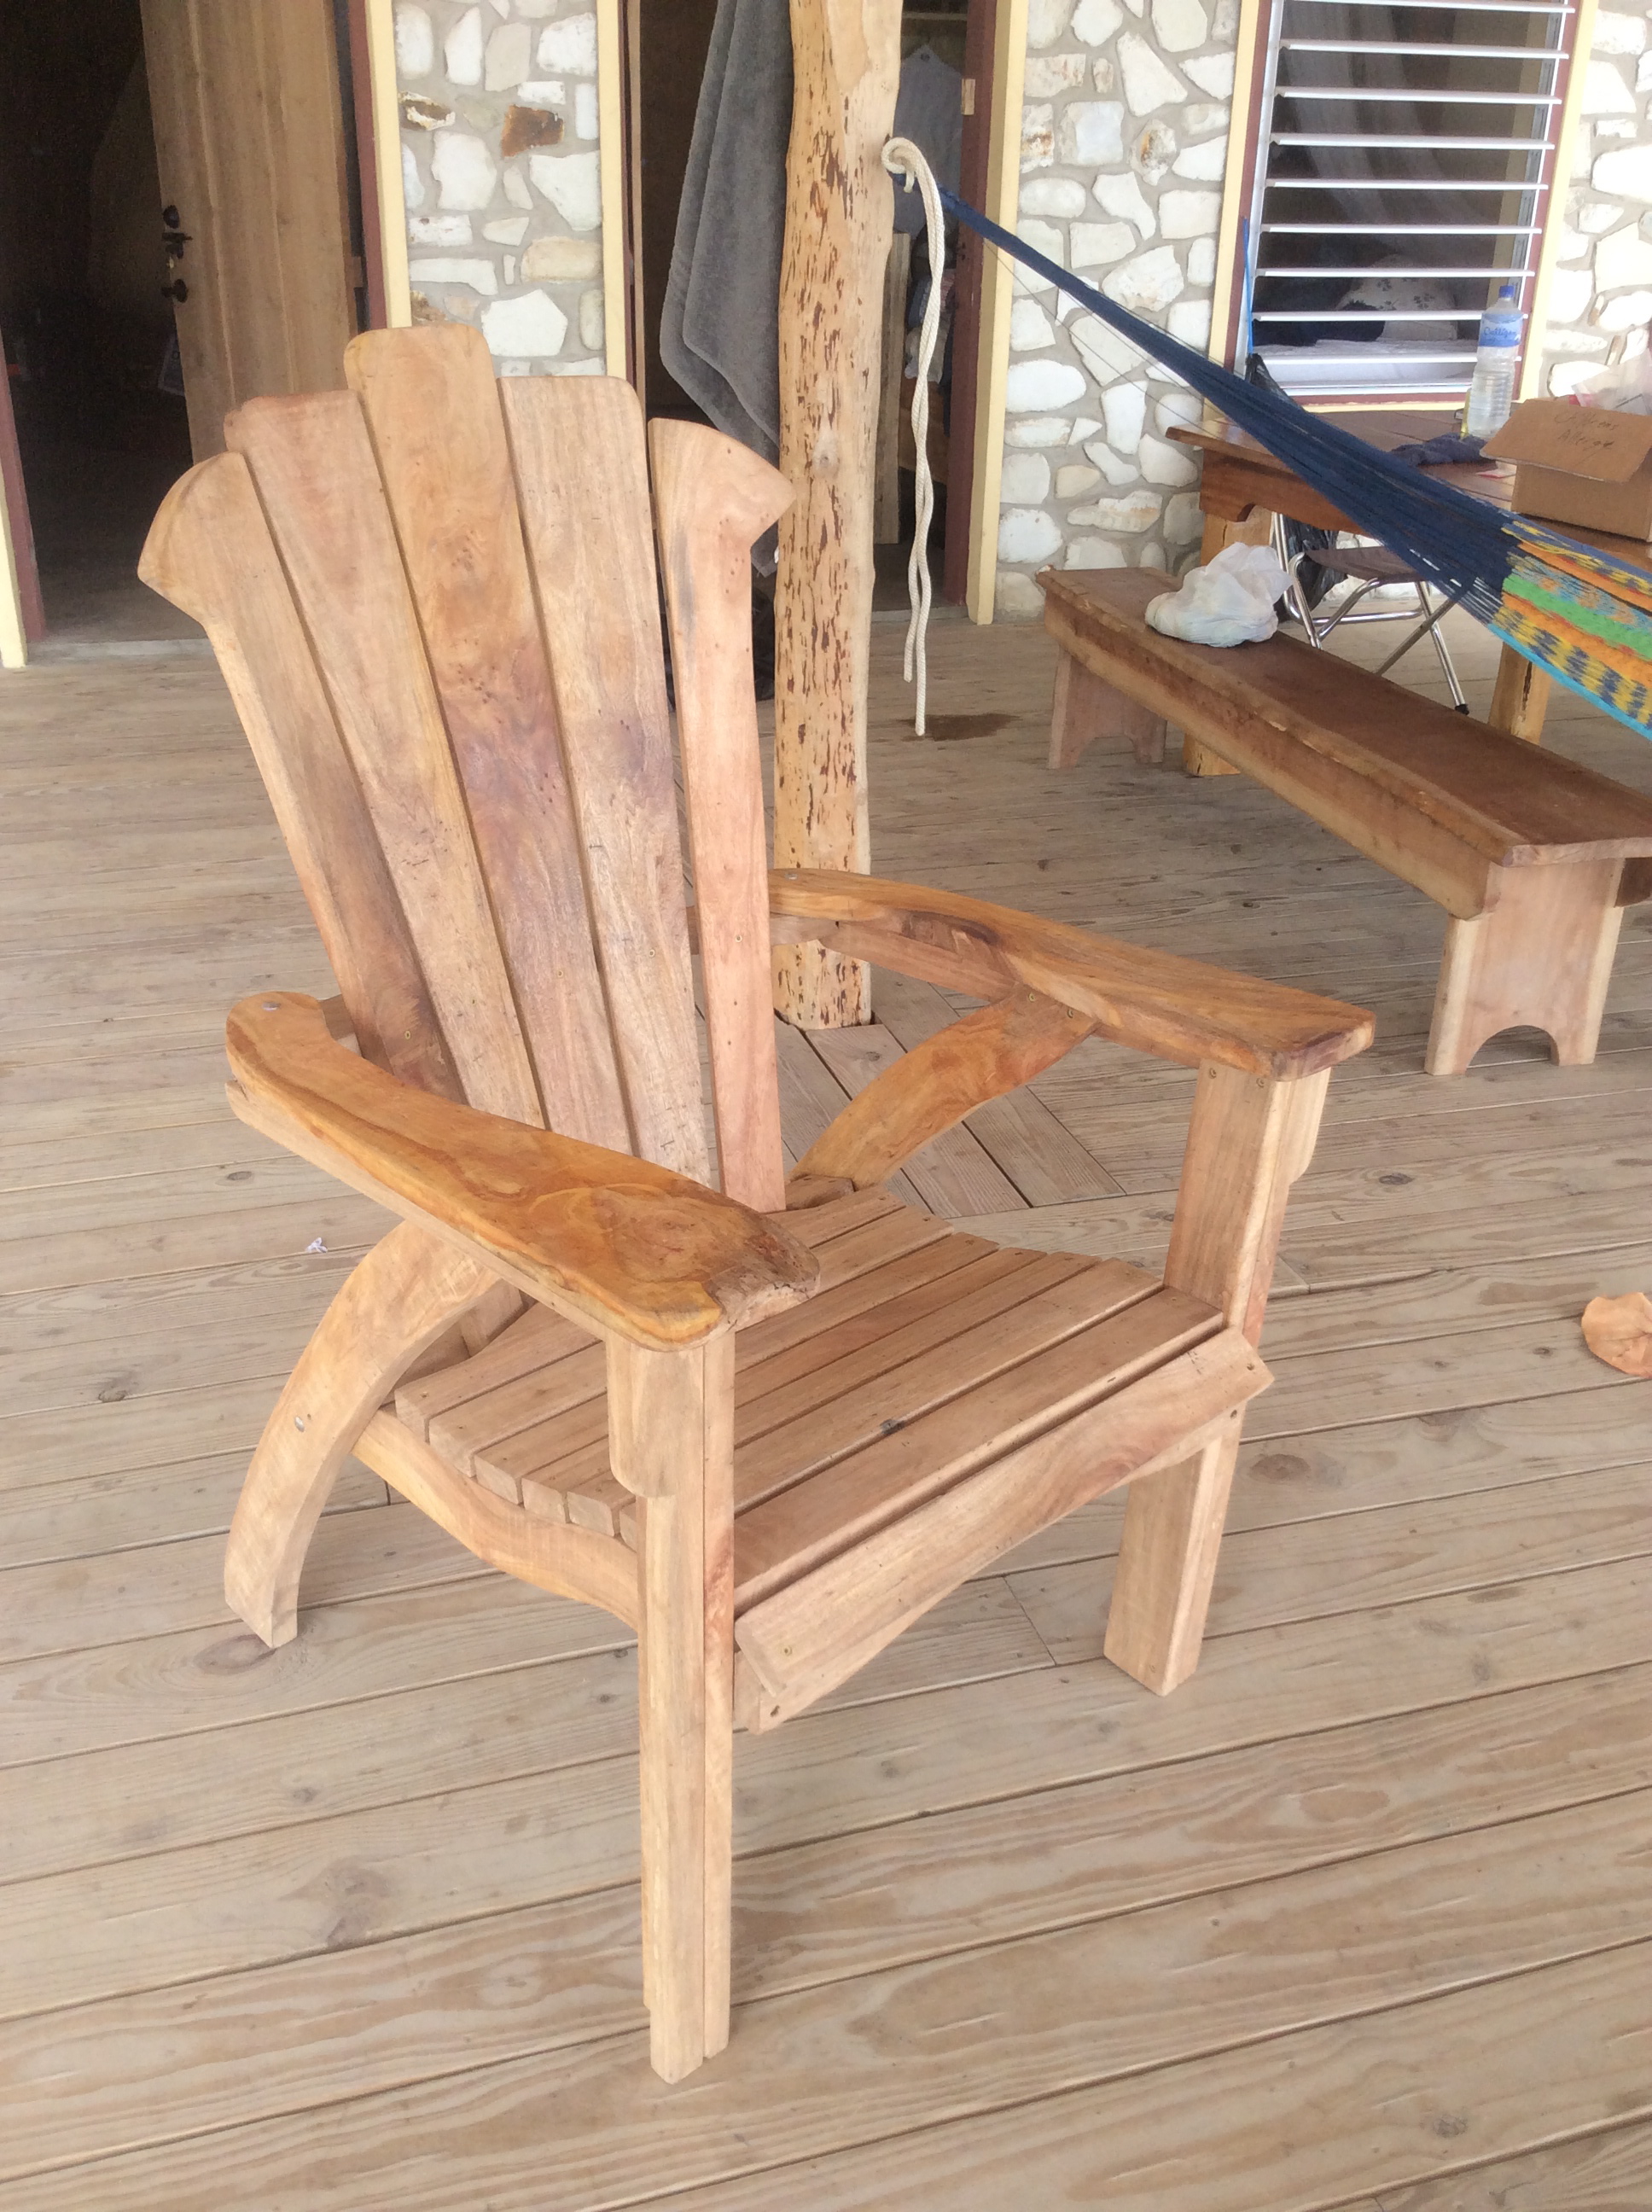 A finished adirondack chair!!